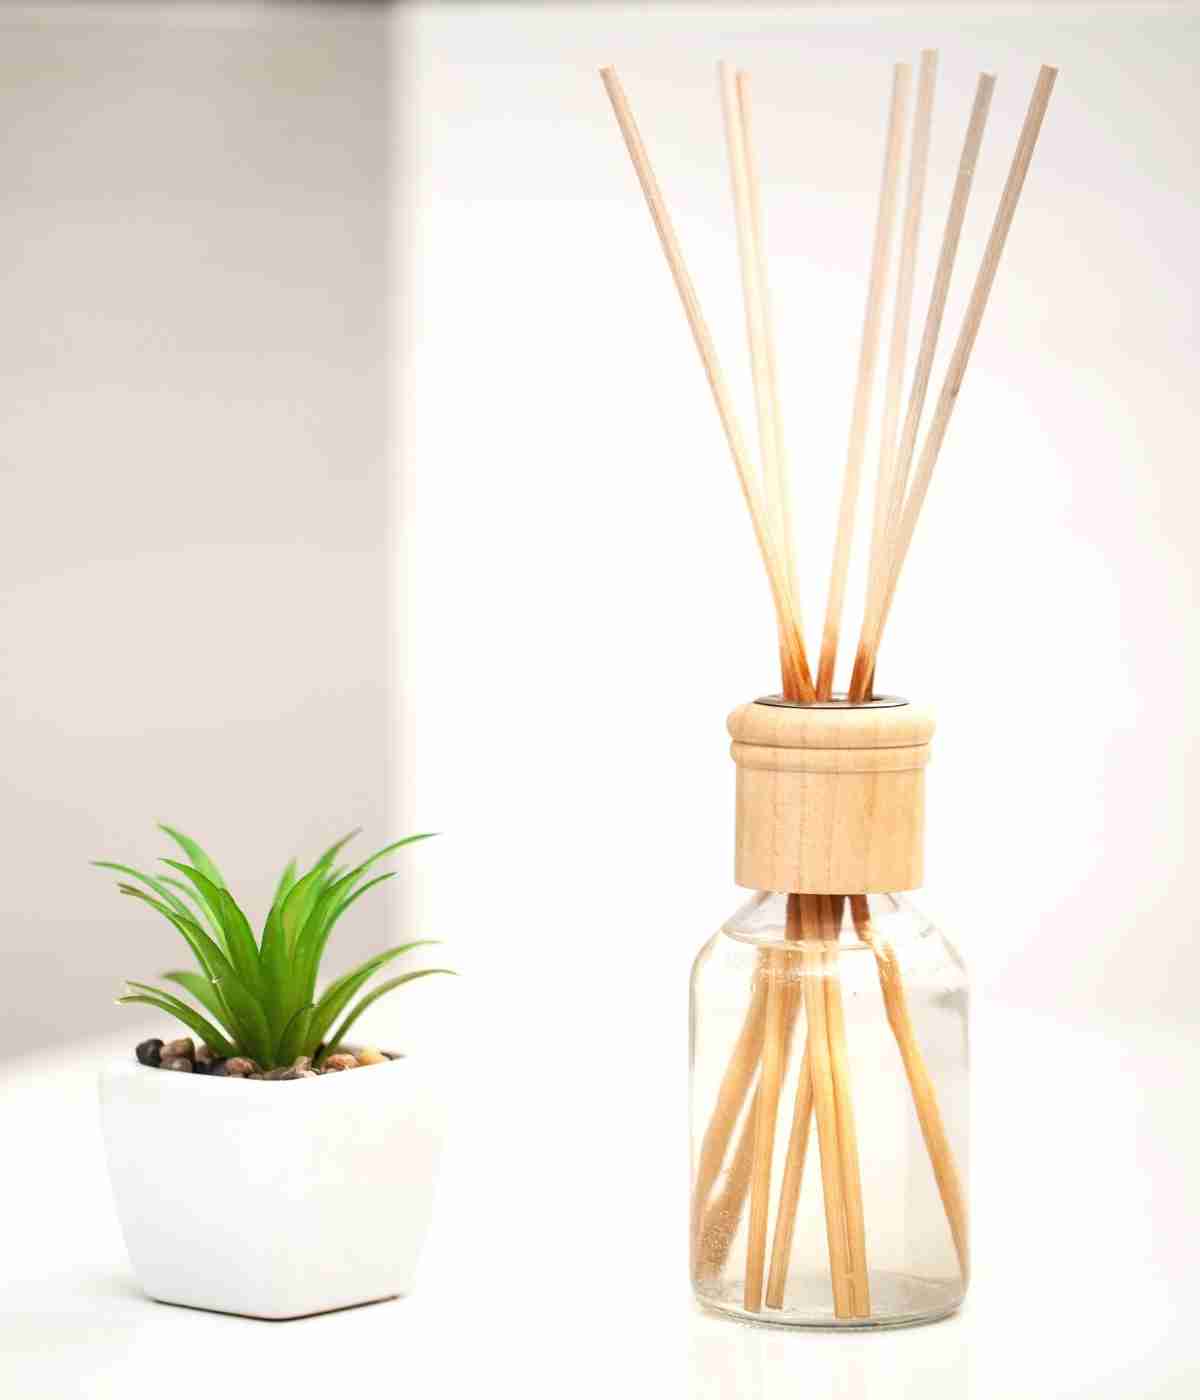 Wooden reed diffuser on table.